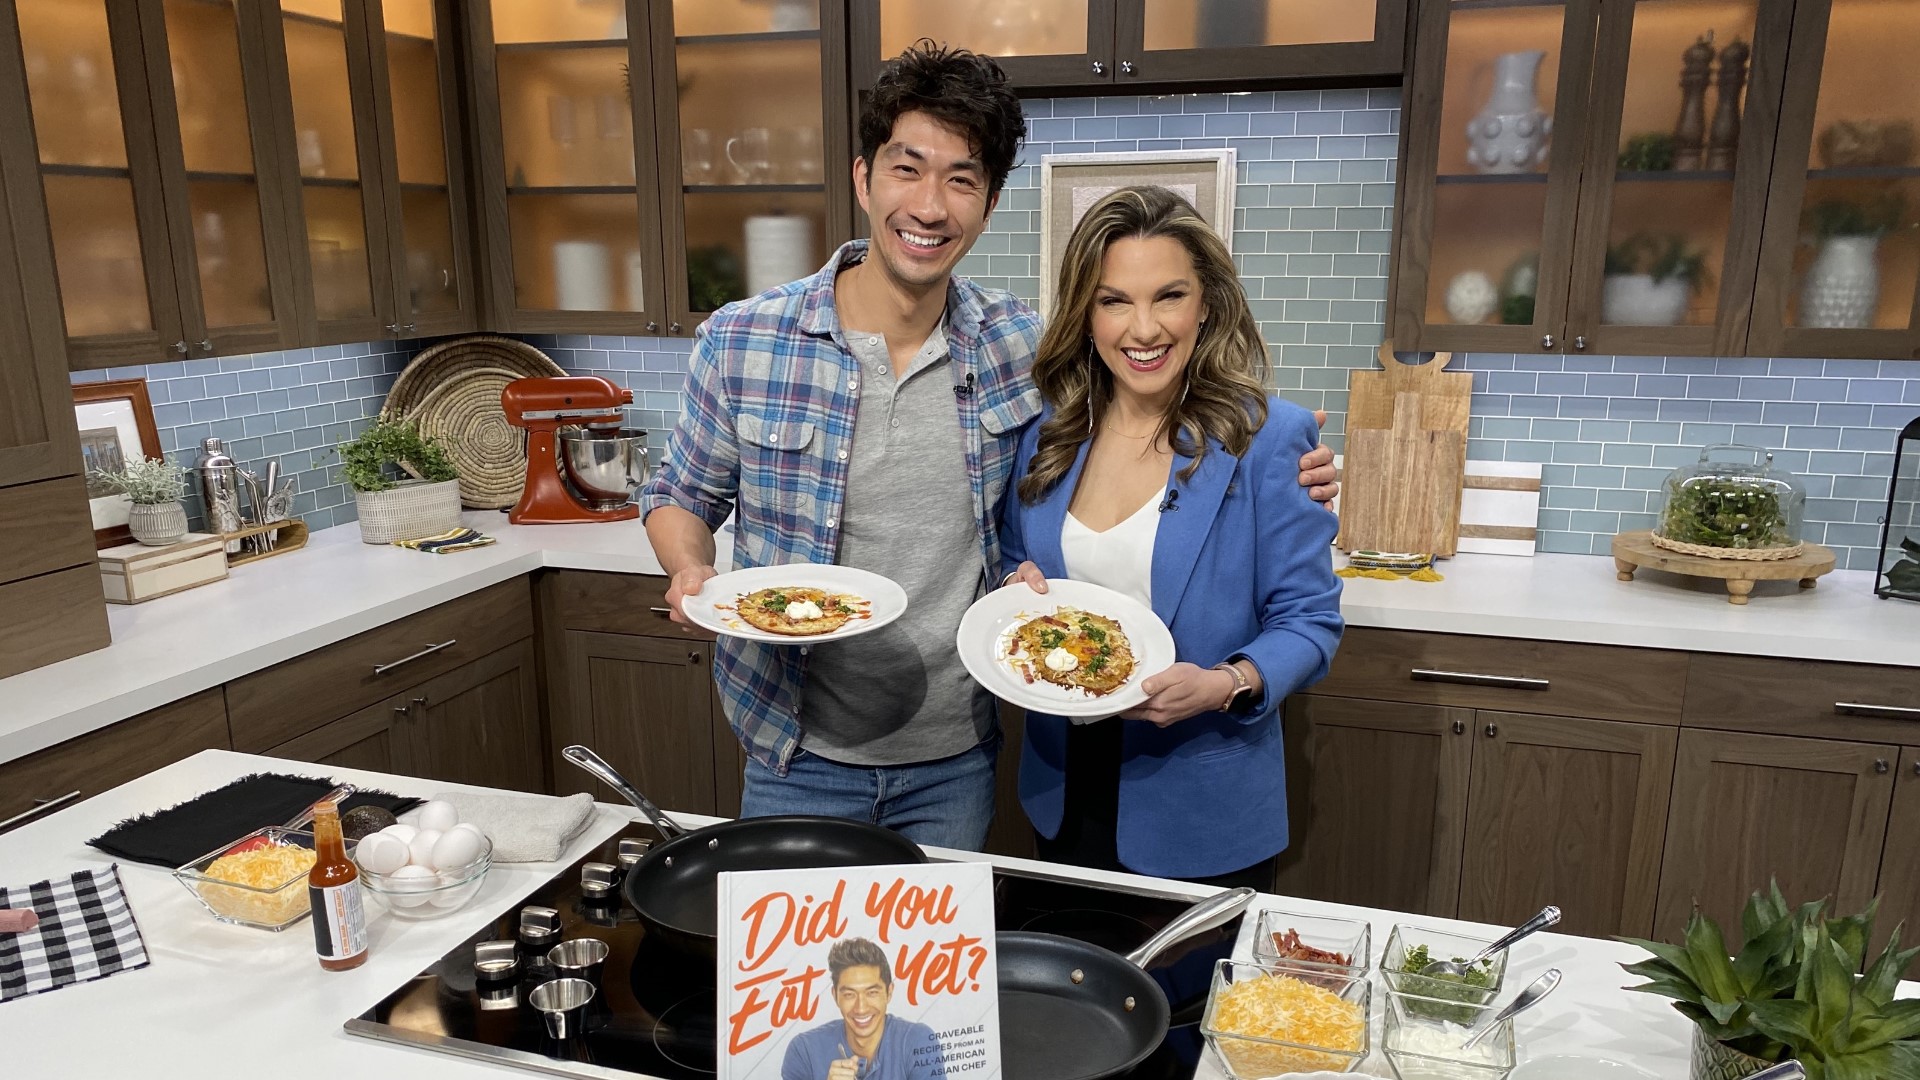 Seattle born Ronnie Woo’s new book Did You Eat Yet? has 100 craveable recipes.